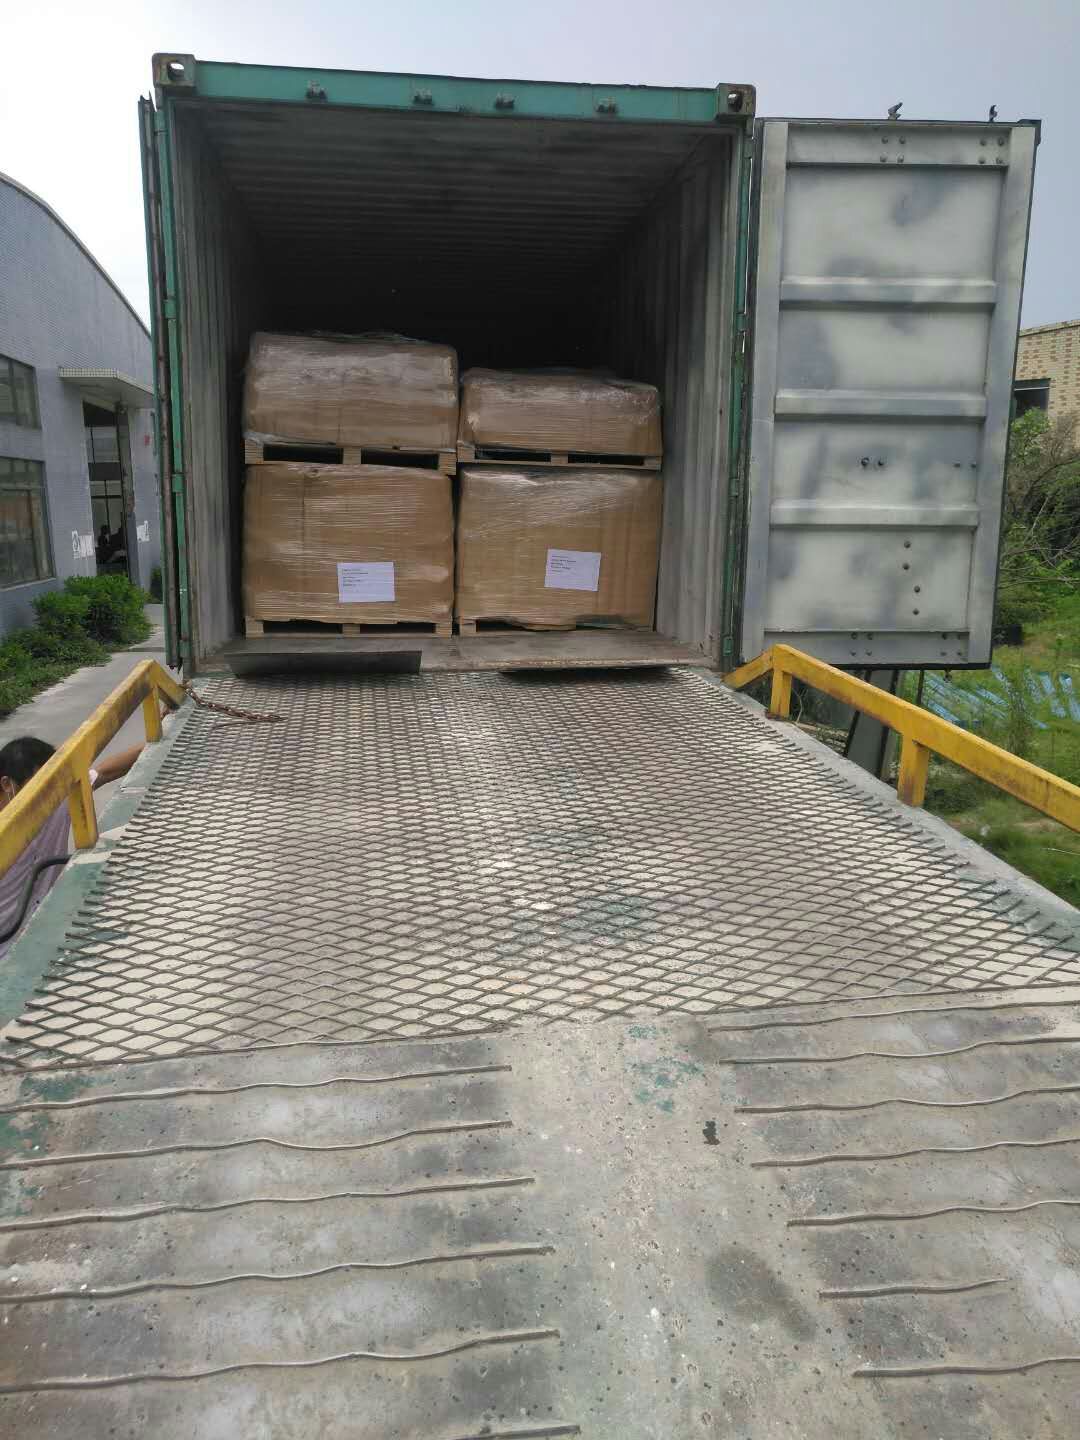 YUNYAN-News About C2TE Tile Adhesive 920 bags and Tile Grout 25 bags delivered to England